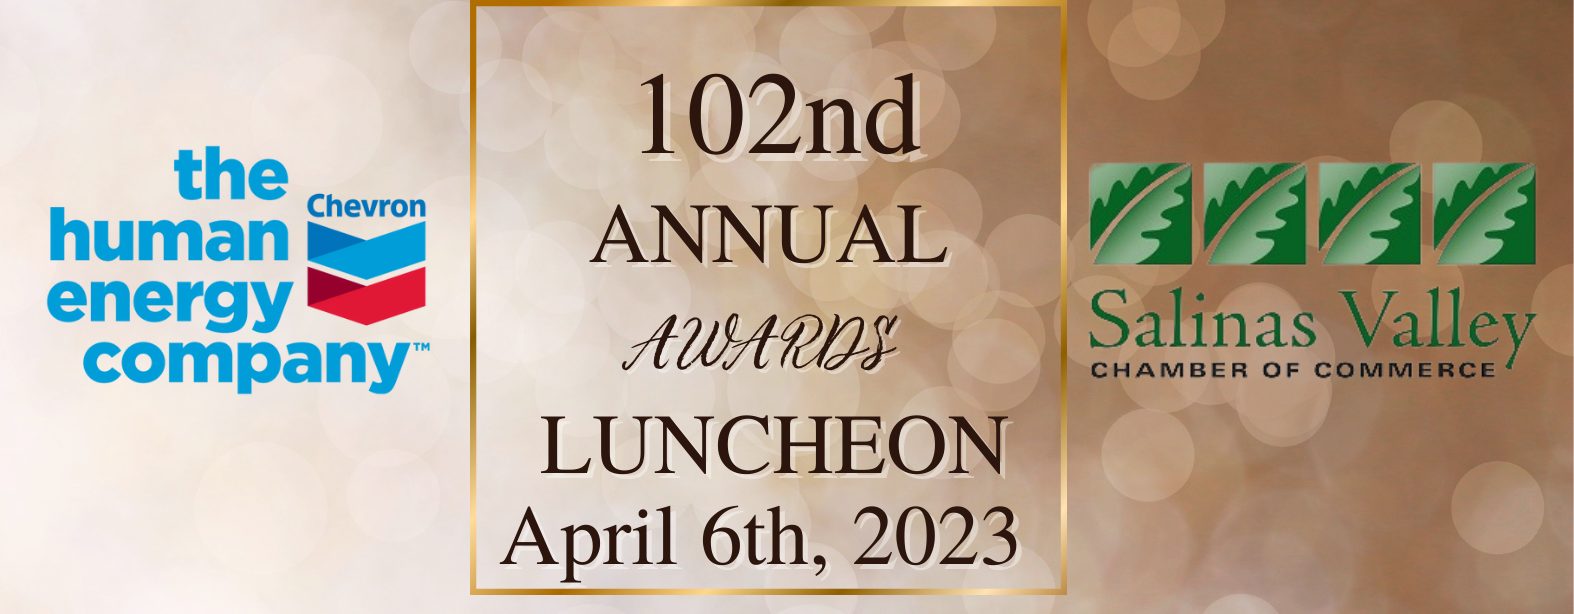 ANNUAL AWARDS LUNCHEON (1574 × 614 px)